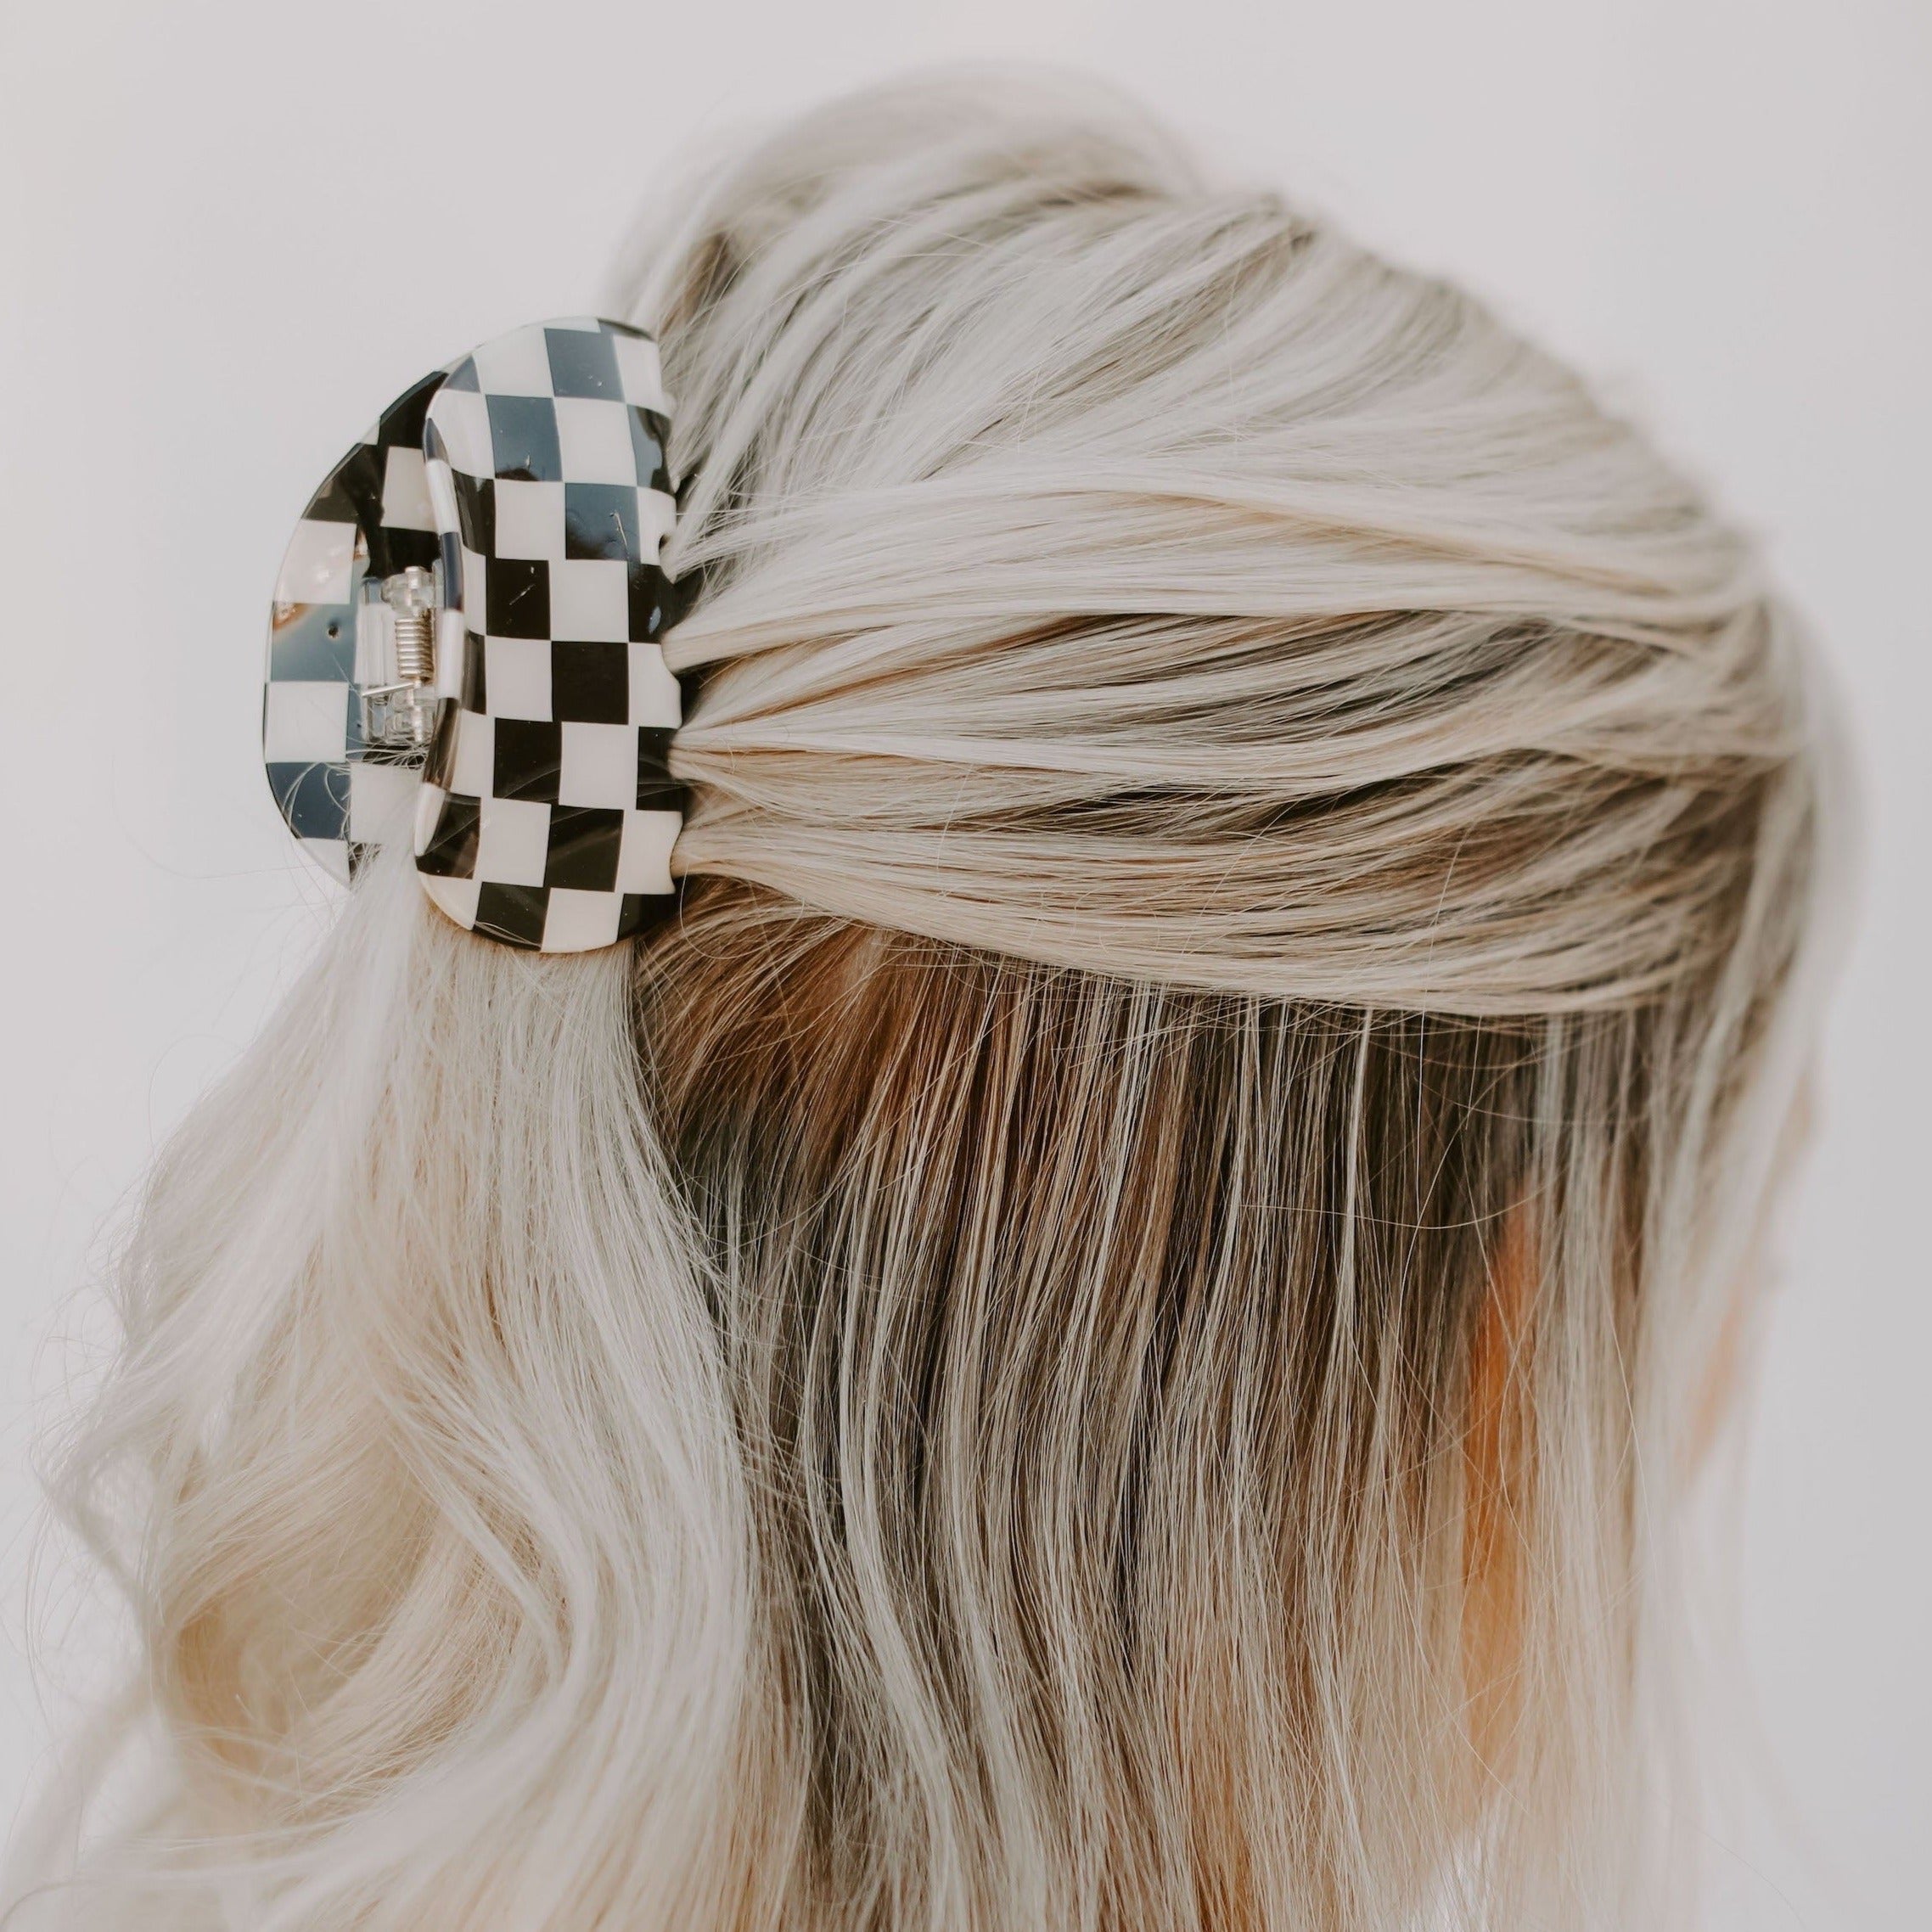 Blonde Haired female with black and white checkered hair clip pulling hair half up.